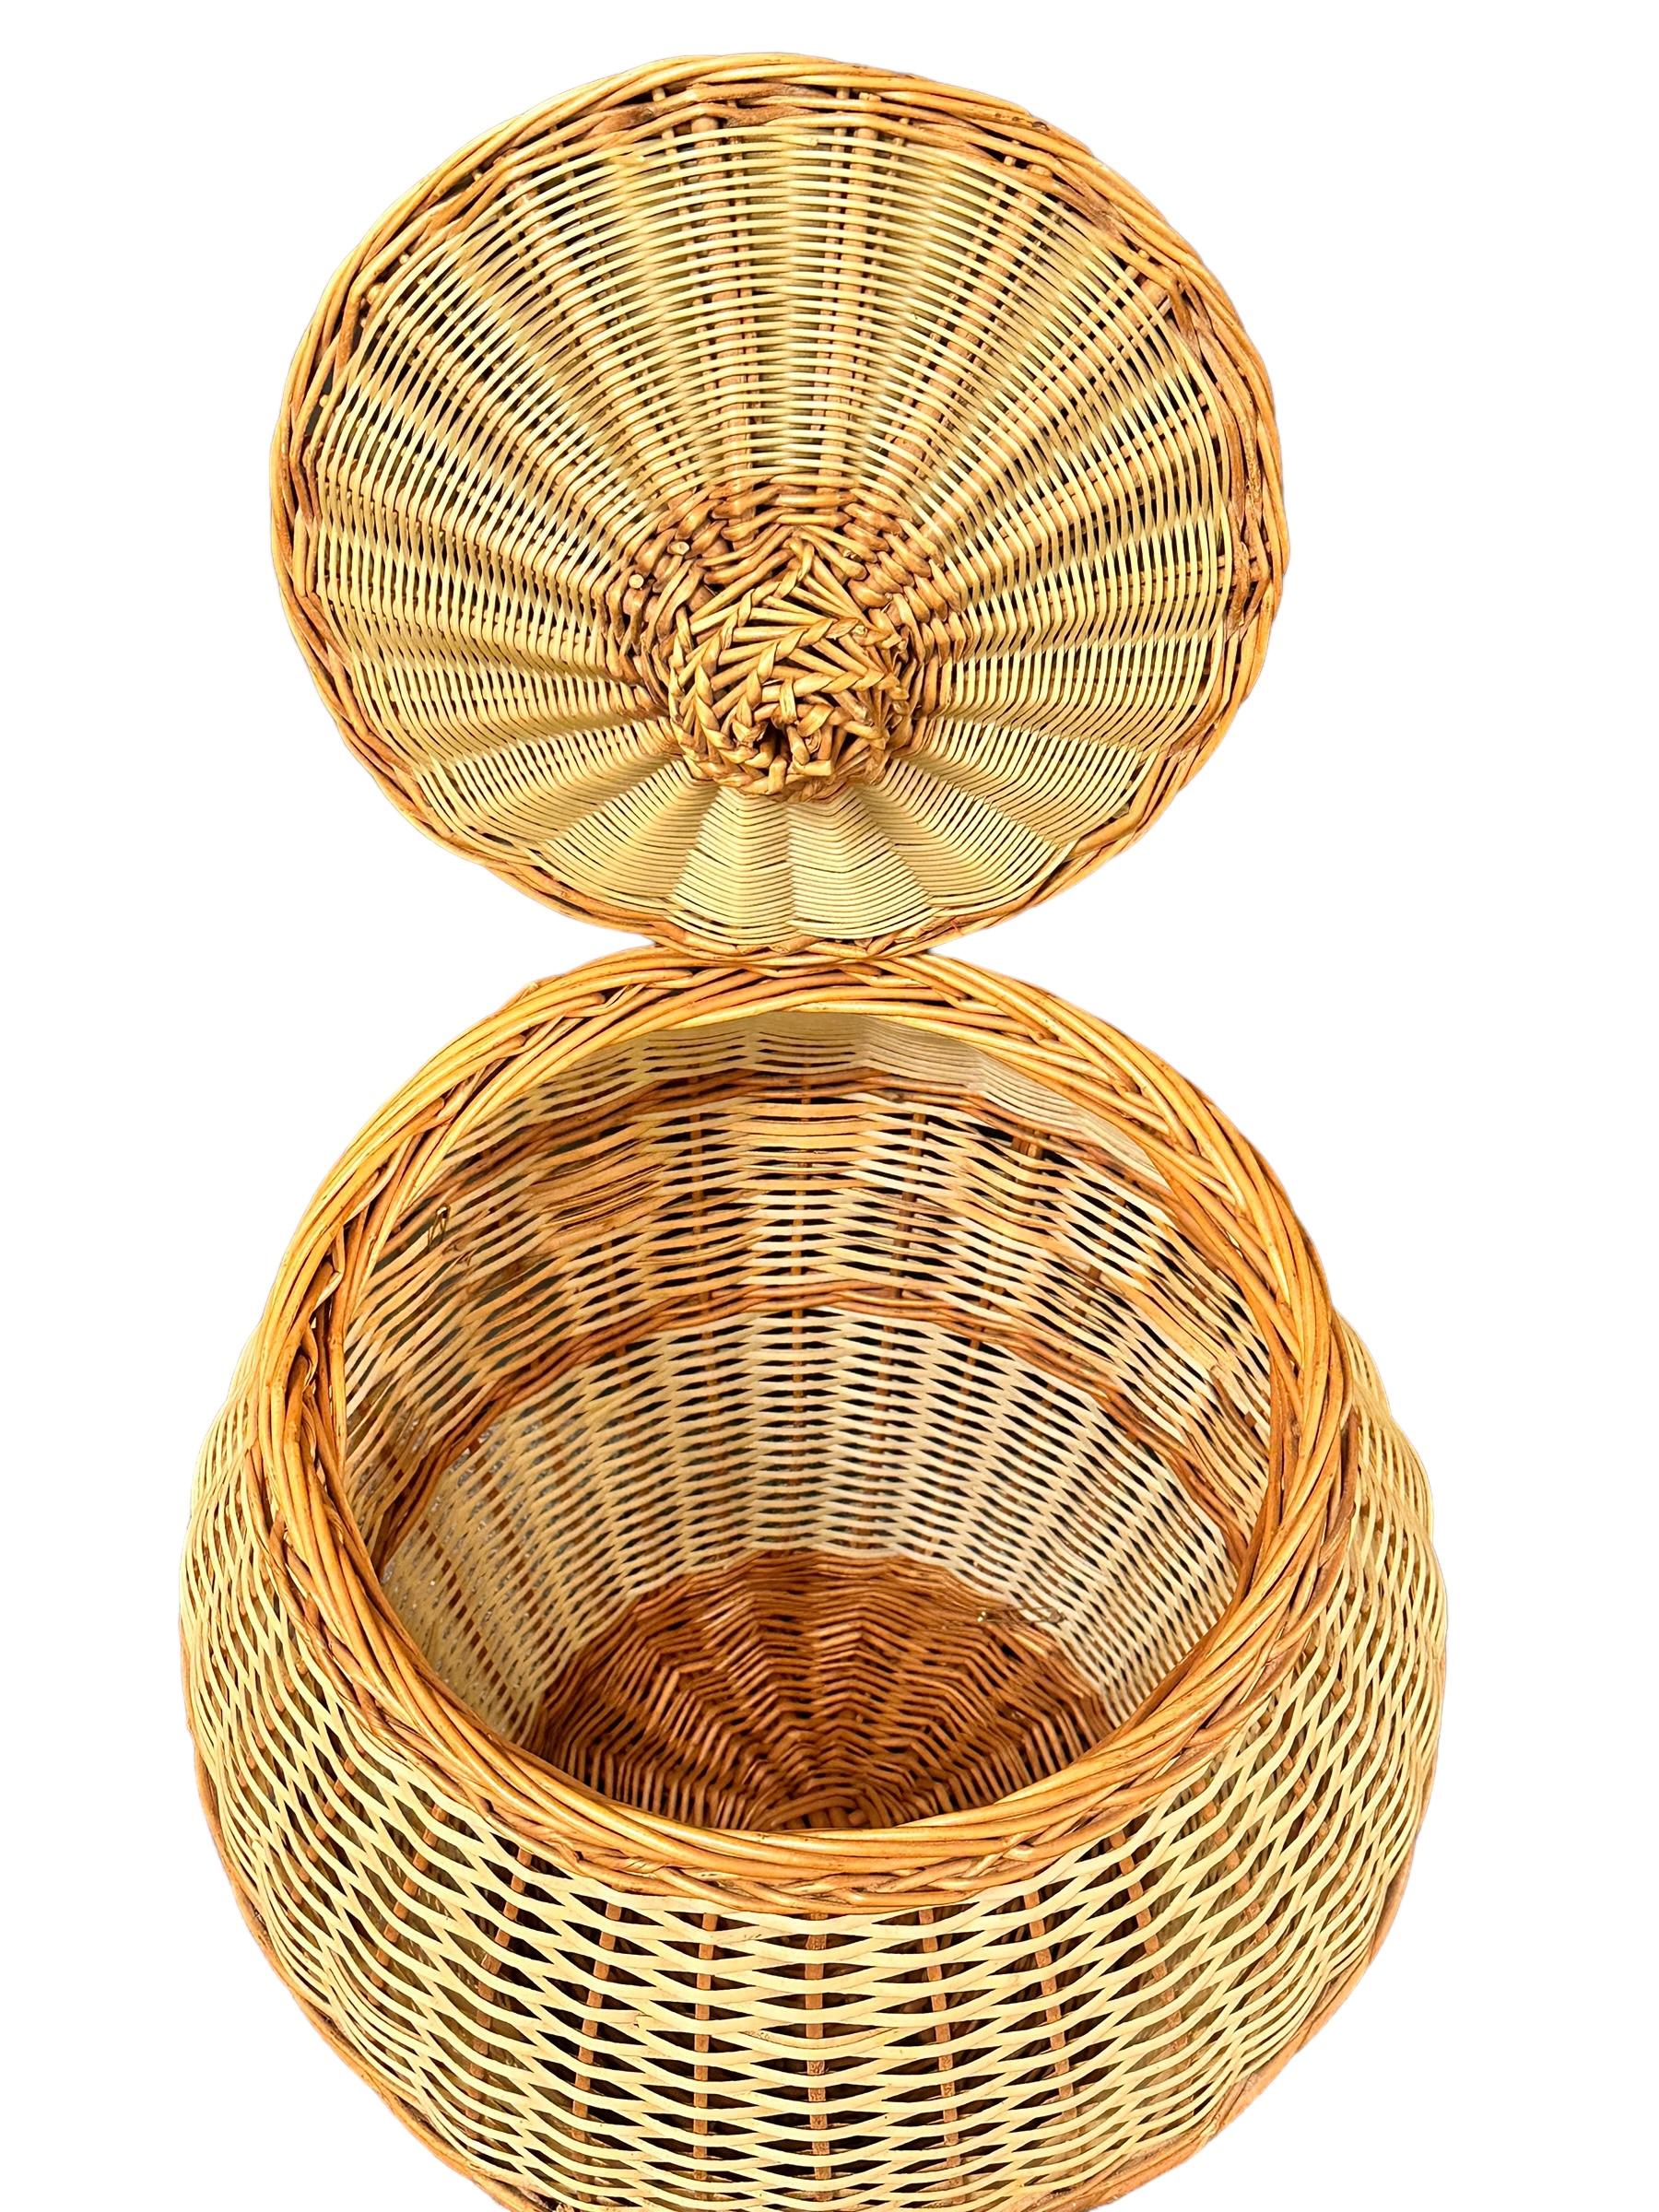 Stunning Large Vintage Midcentury Wicker Laundry Basket Hamper, 1970s, Italy In Good Condition For Sale In Nuernberg, DE